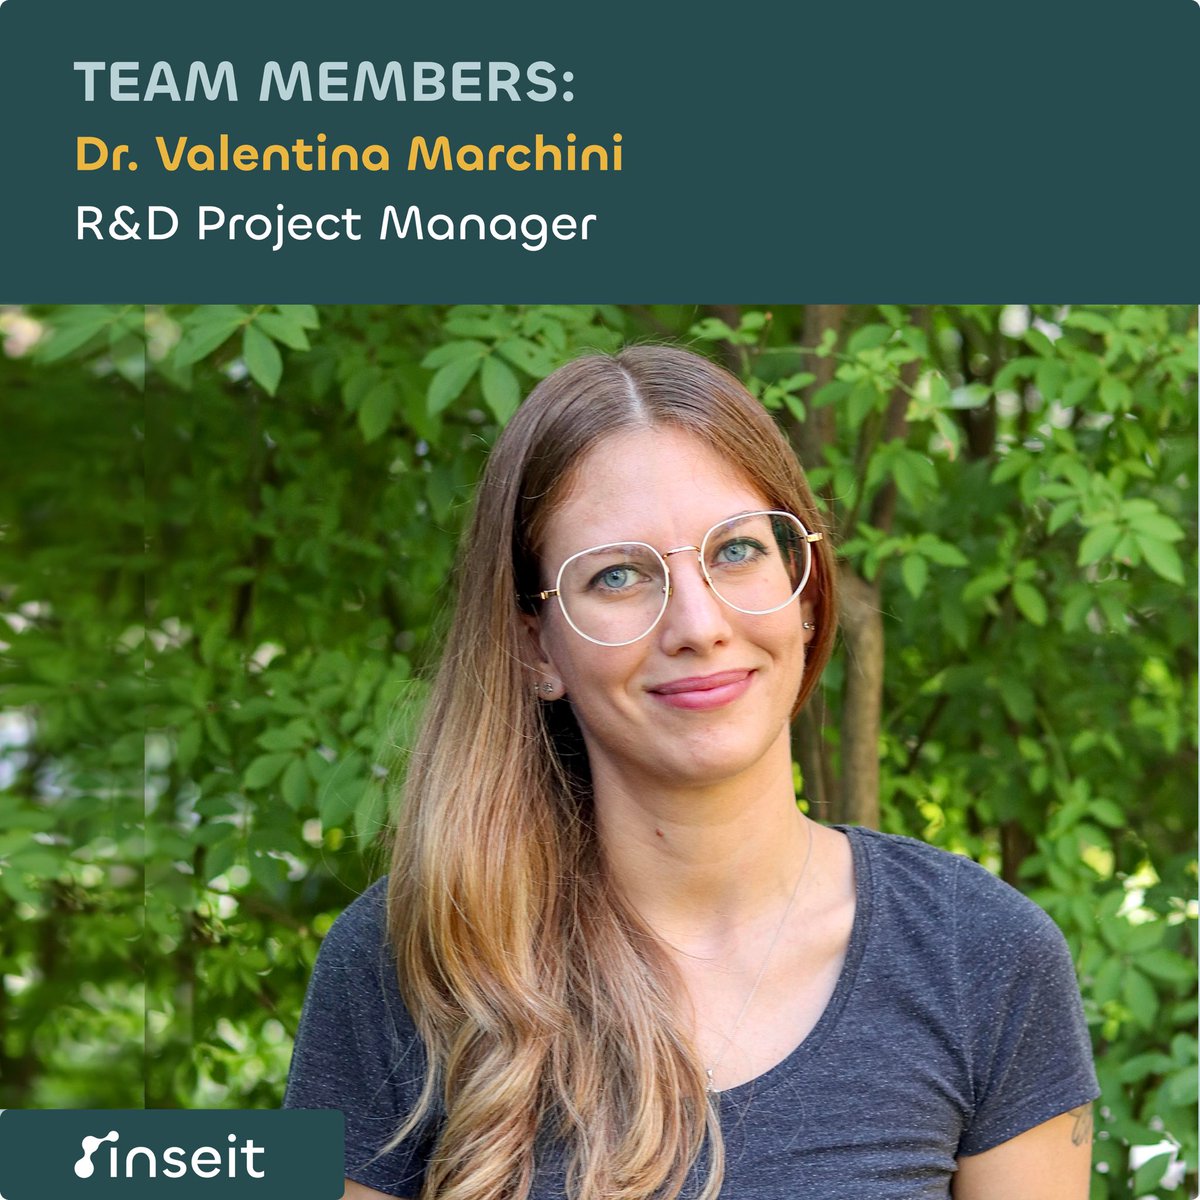 Meet our R&D Project Manager @Valeneesan
After receiving her PhD in #Biocatalysis in the @ParadisiResLab at @unibern, she joined #inSEIT as the first employee of the company!
Now, she has decided to move to Italy and start a new chapter.
We wish her a #successful new beginning!🔥